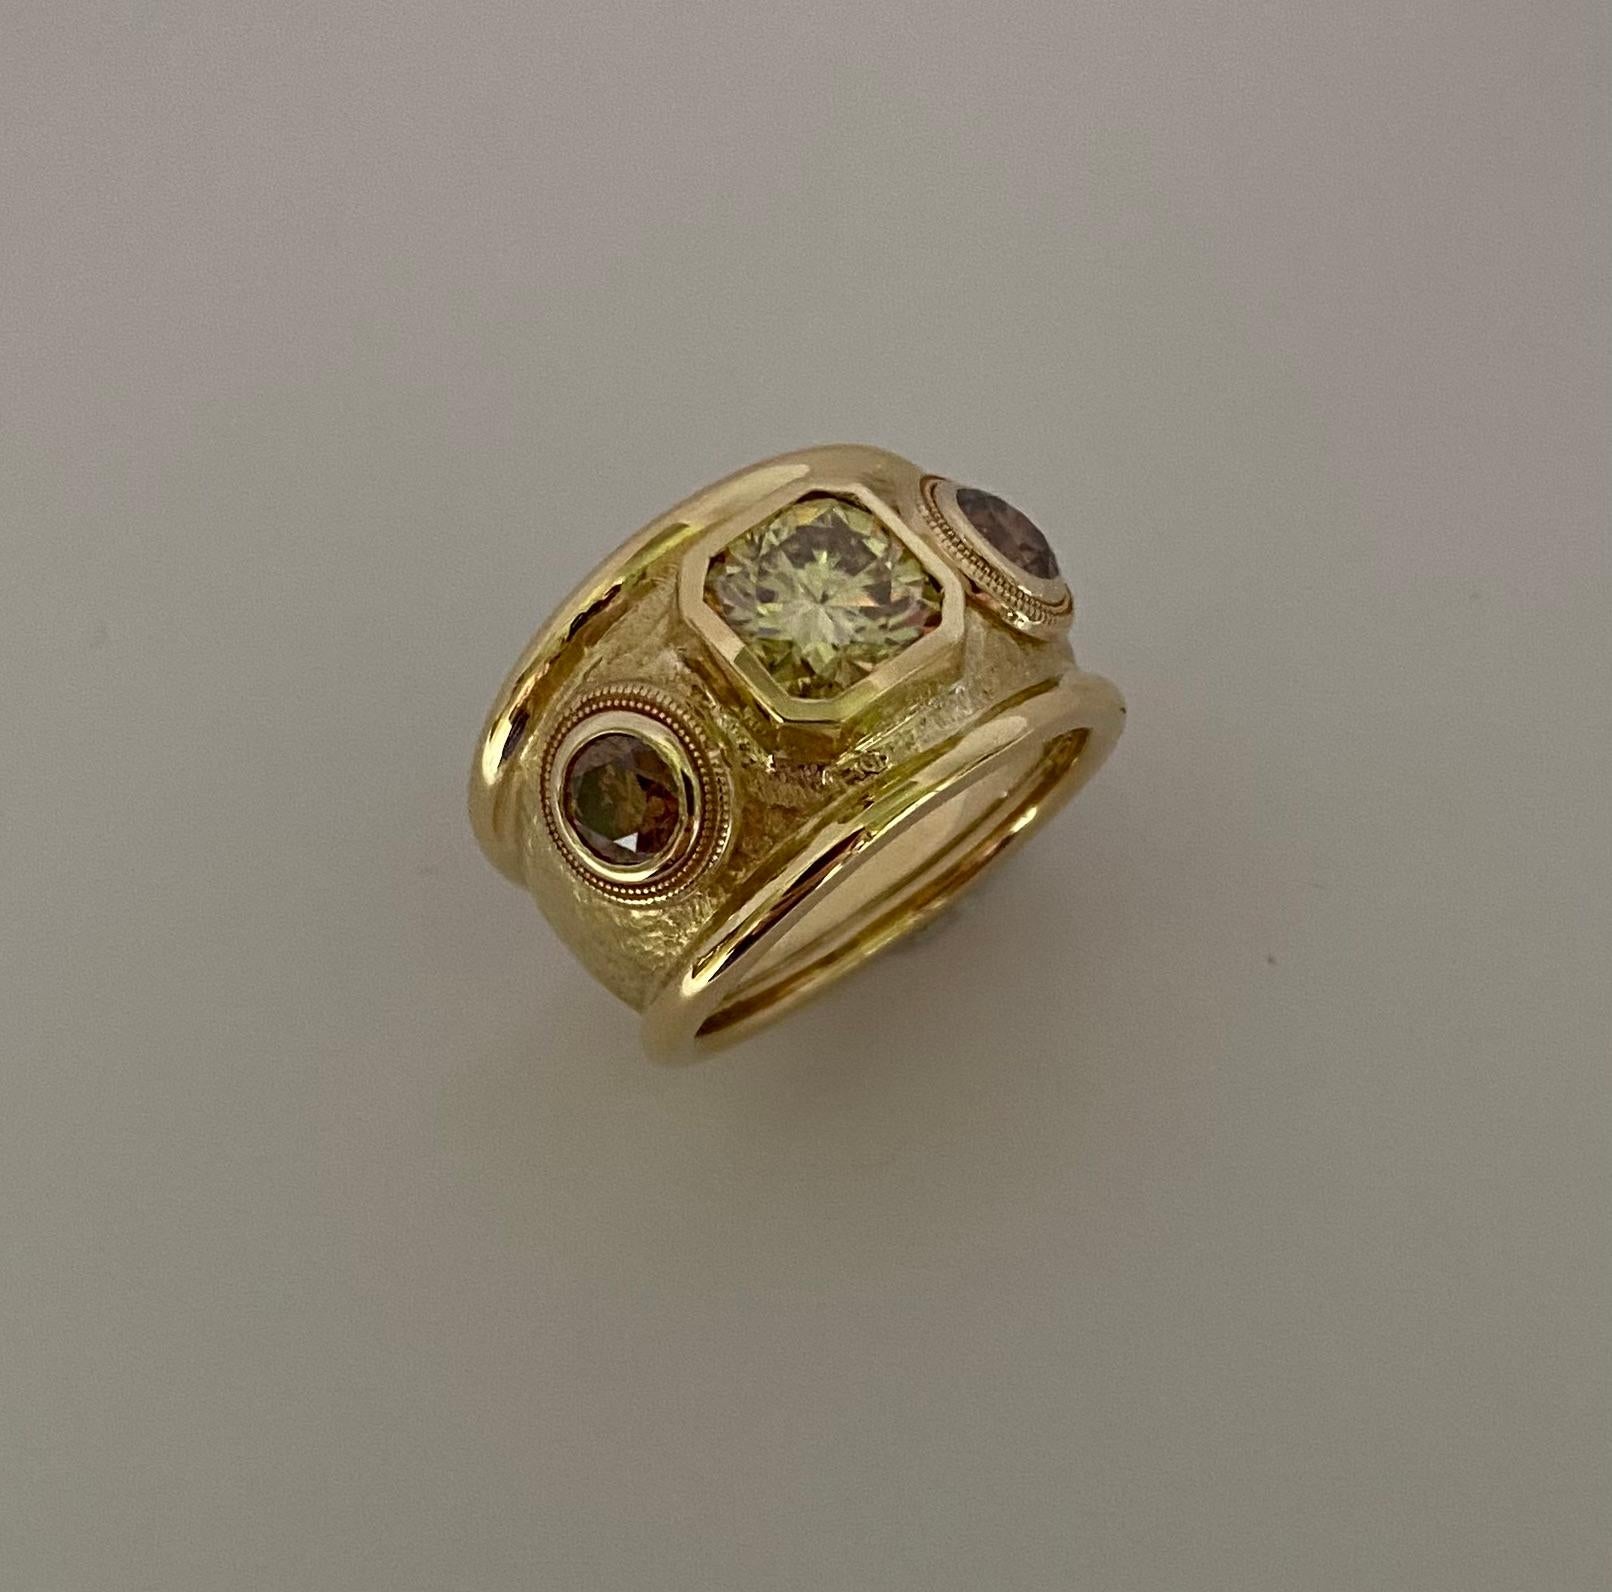 A yellow diamond is complimented by cognac diamonds in this classic bombe style ring.  The center diamond is a light fancy yellow square cut diamond of 1.92 carats.  The VS clarity gem is very well cut and very flashy.  The diamond is flanked by a